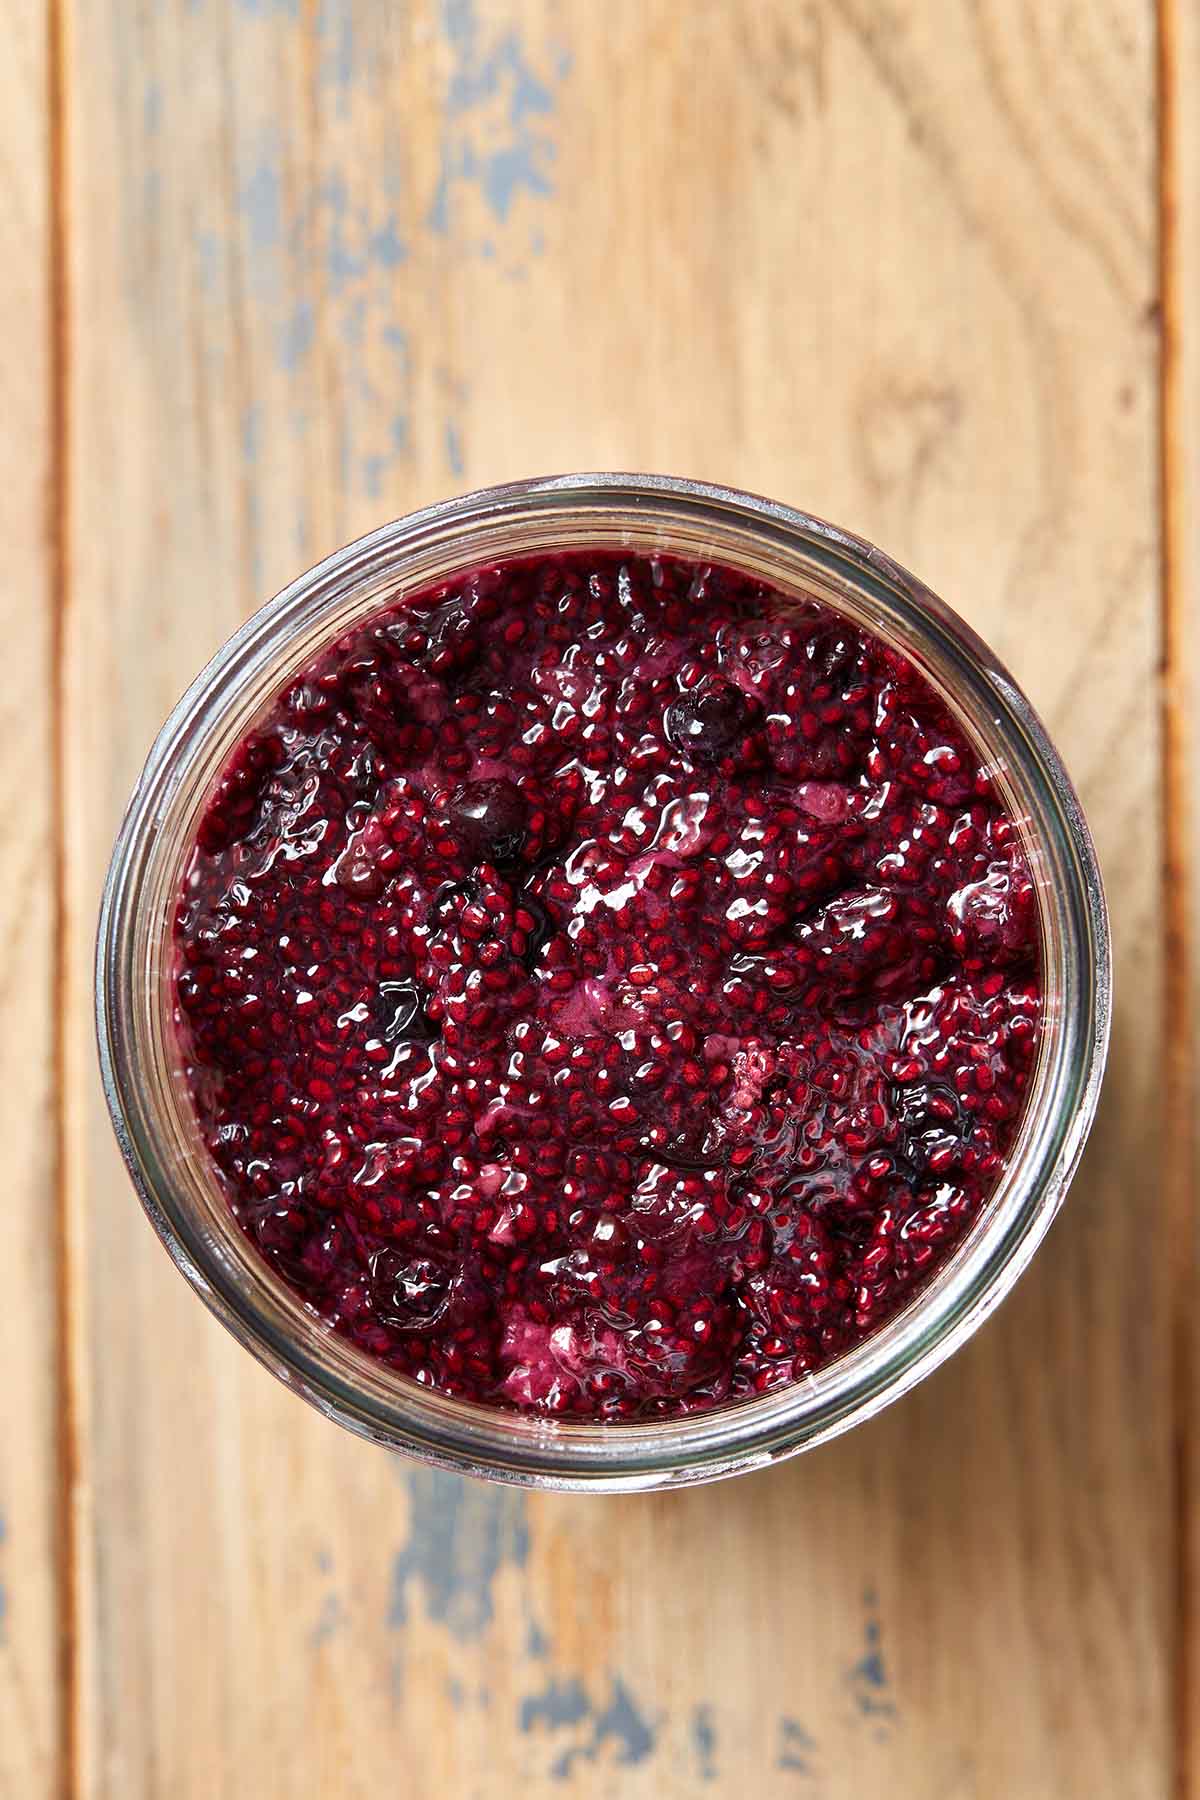 Overhead view of chia seed jam in a glass jar on a wooden table.